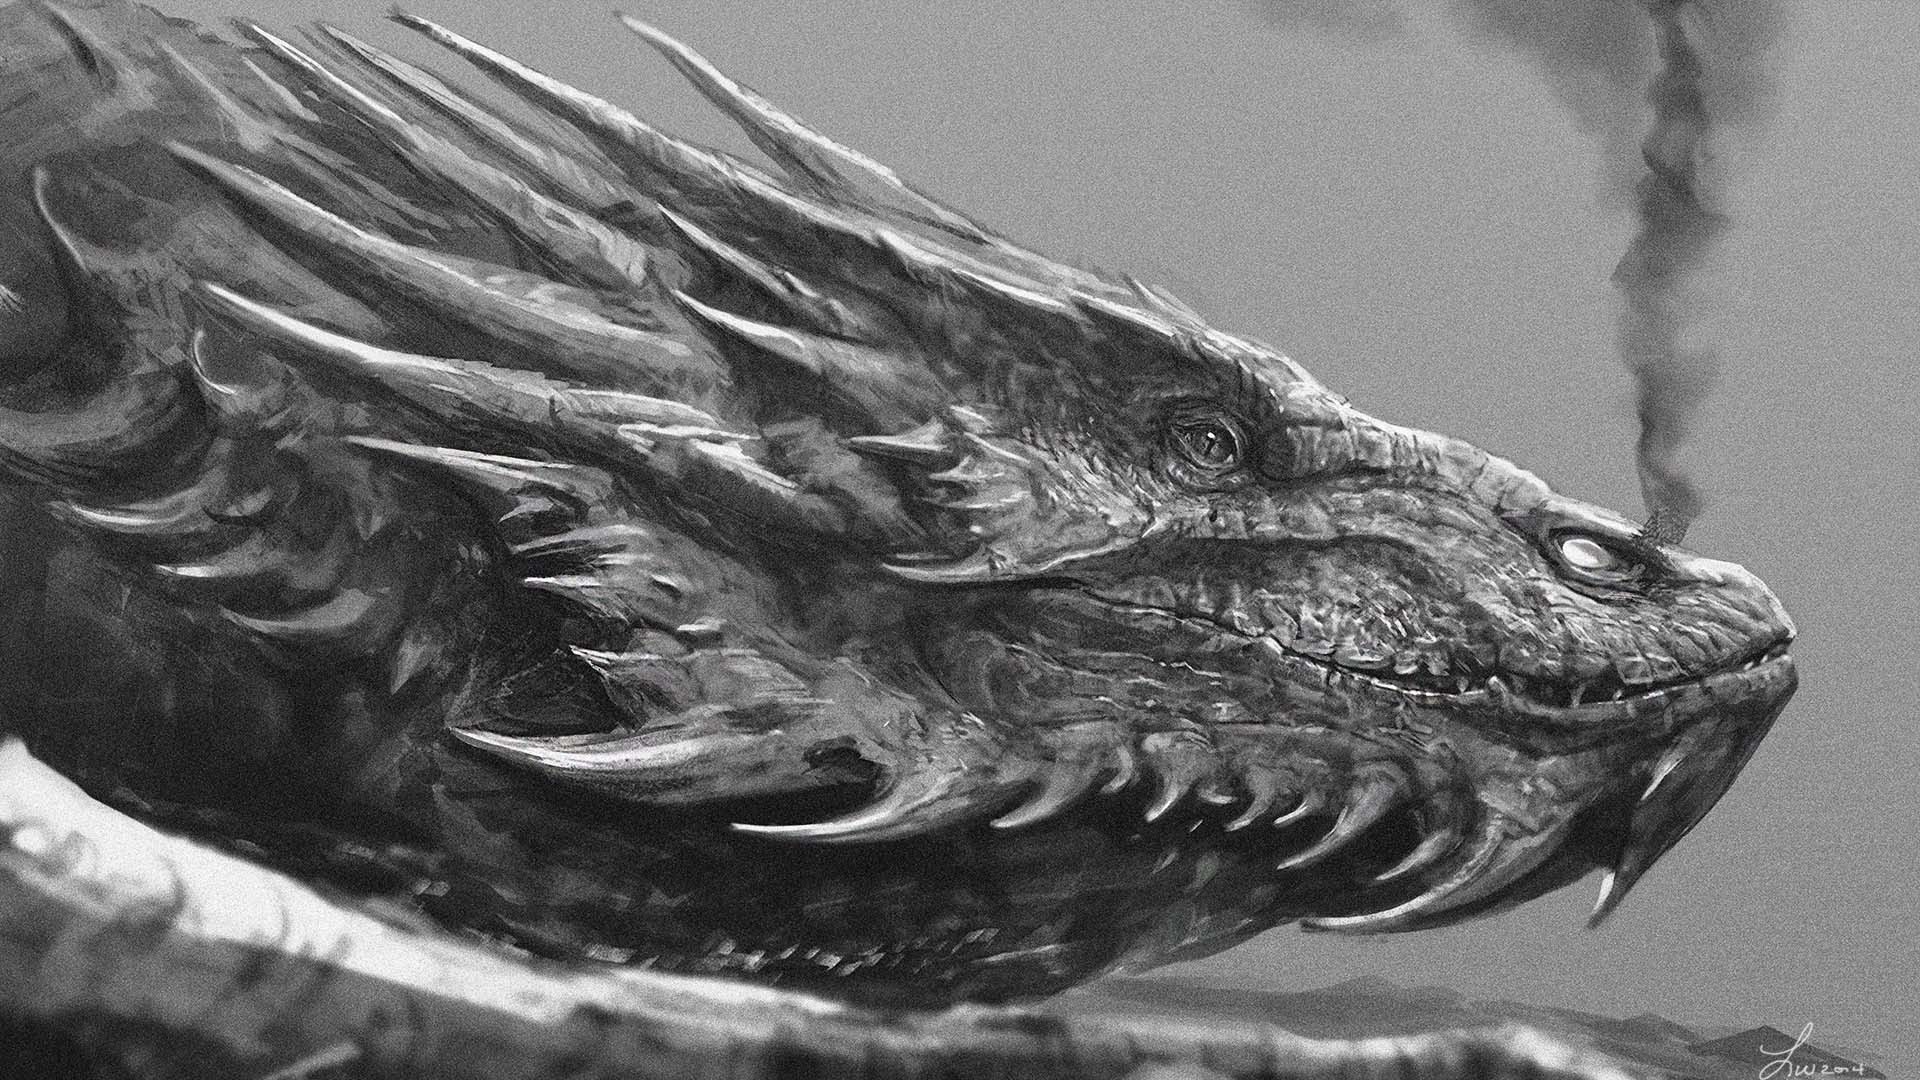 1920x1080 Smaug Wallpaper by TwoDD dragon The Hobbit Lord of the Rings J.R.R. Tolkien  monster beast creature animal | Create your own roleplaying game material  w/ RPG ...